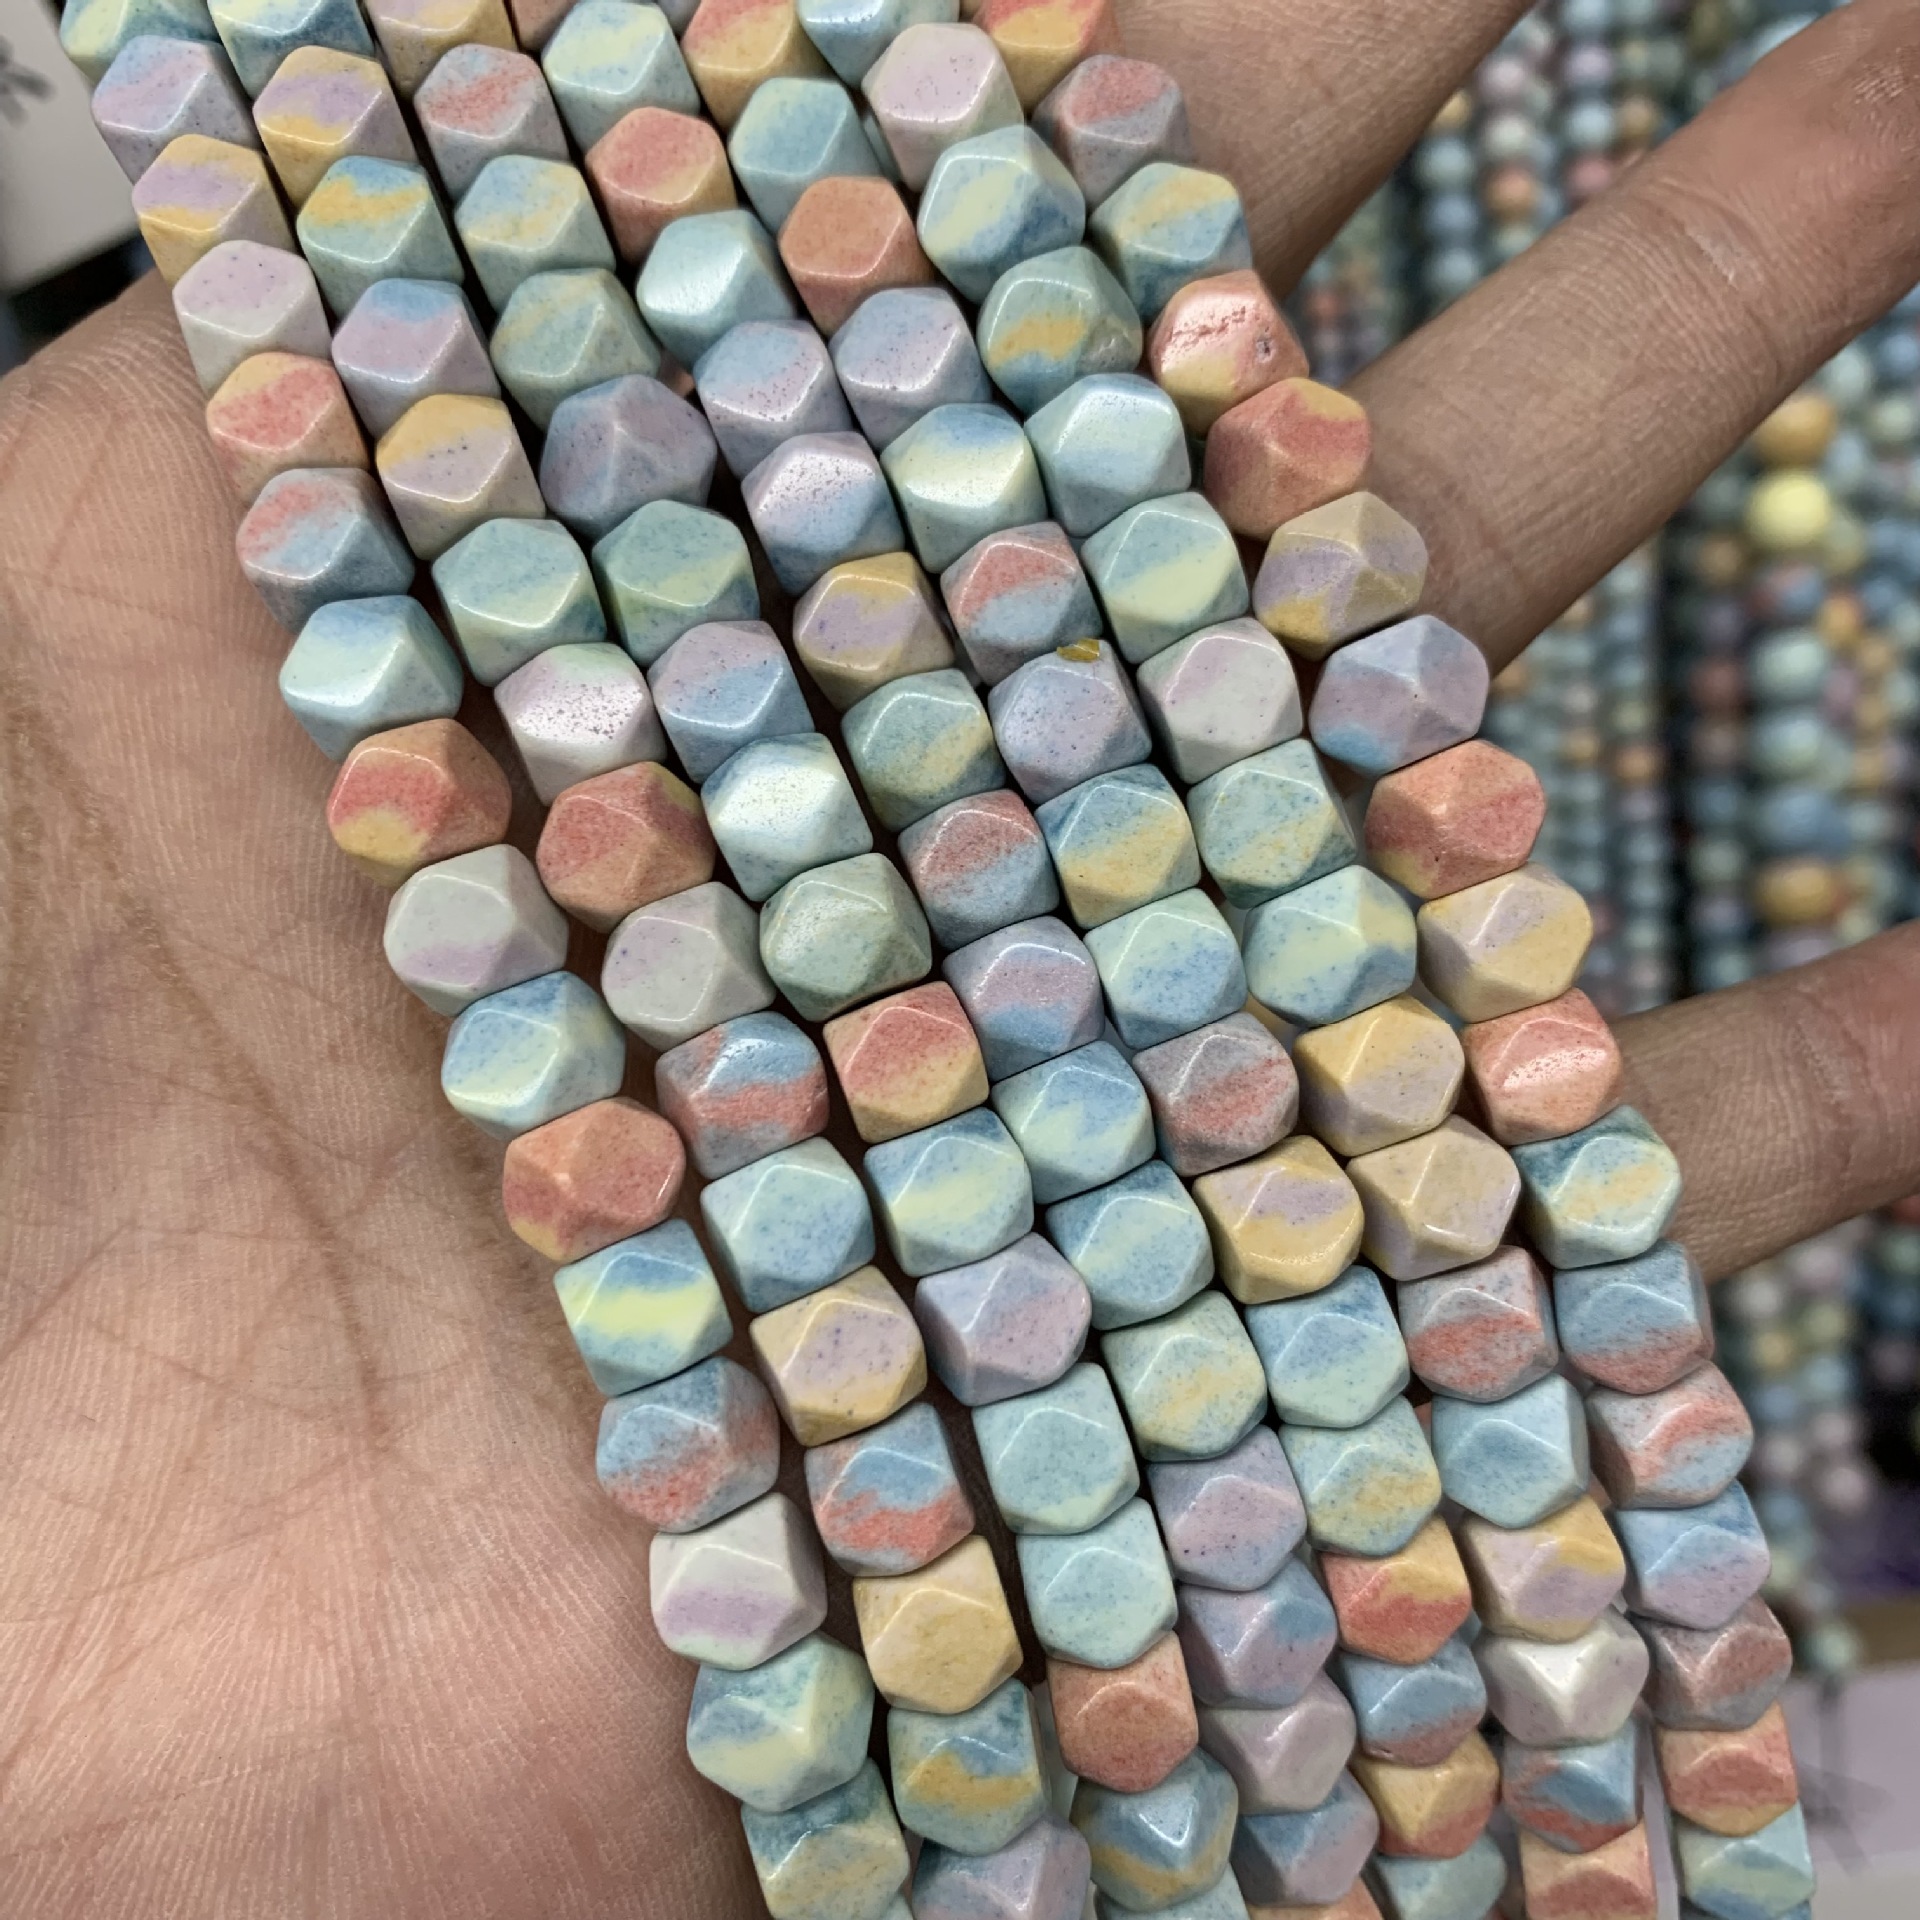 10:52 pieces of 6-7mm cube beads